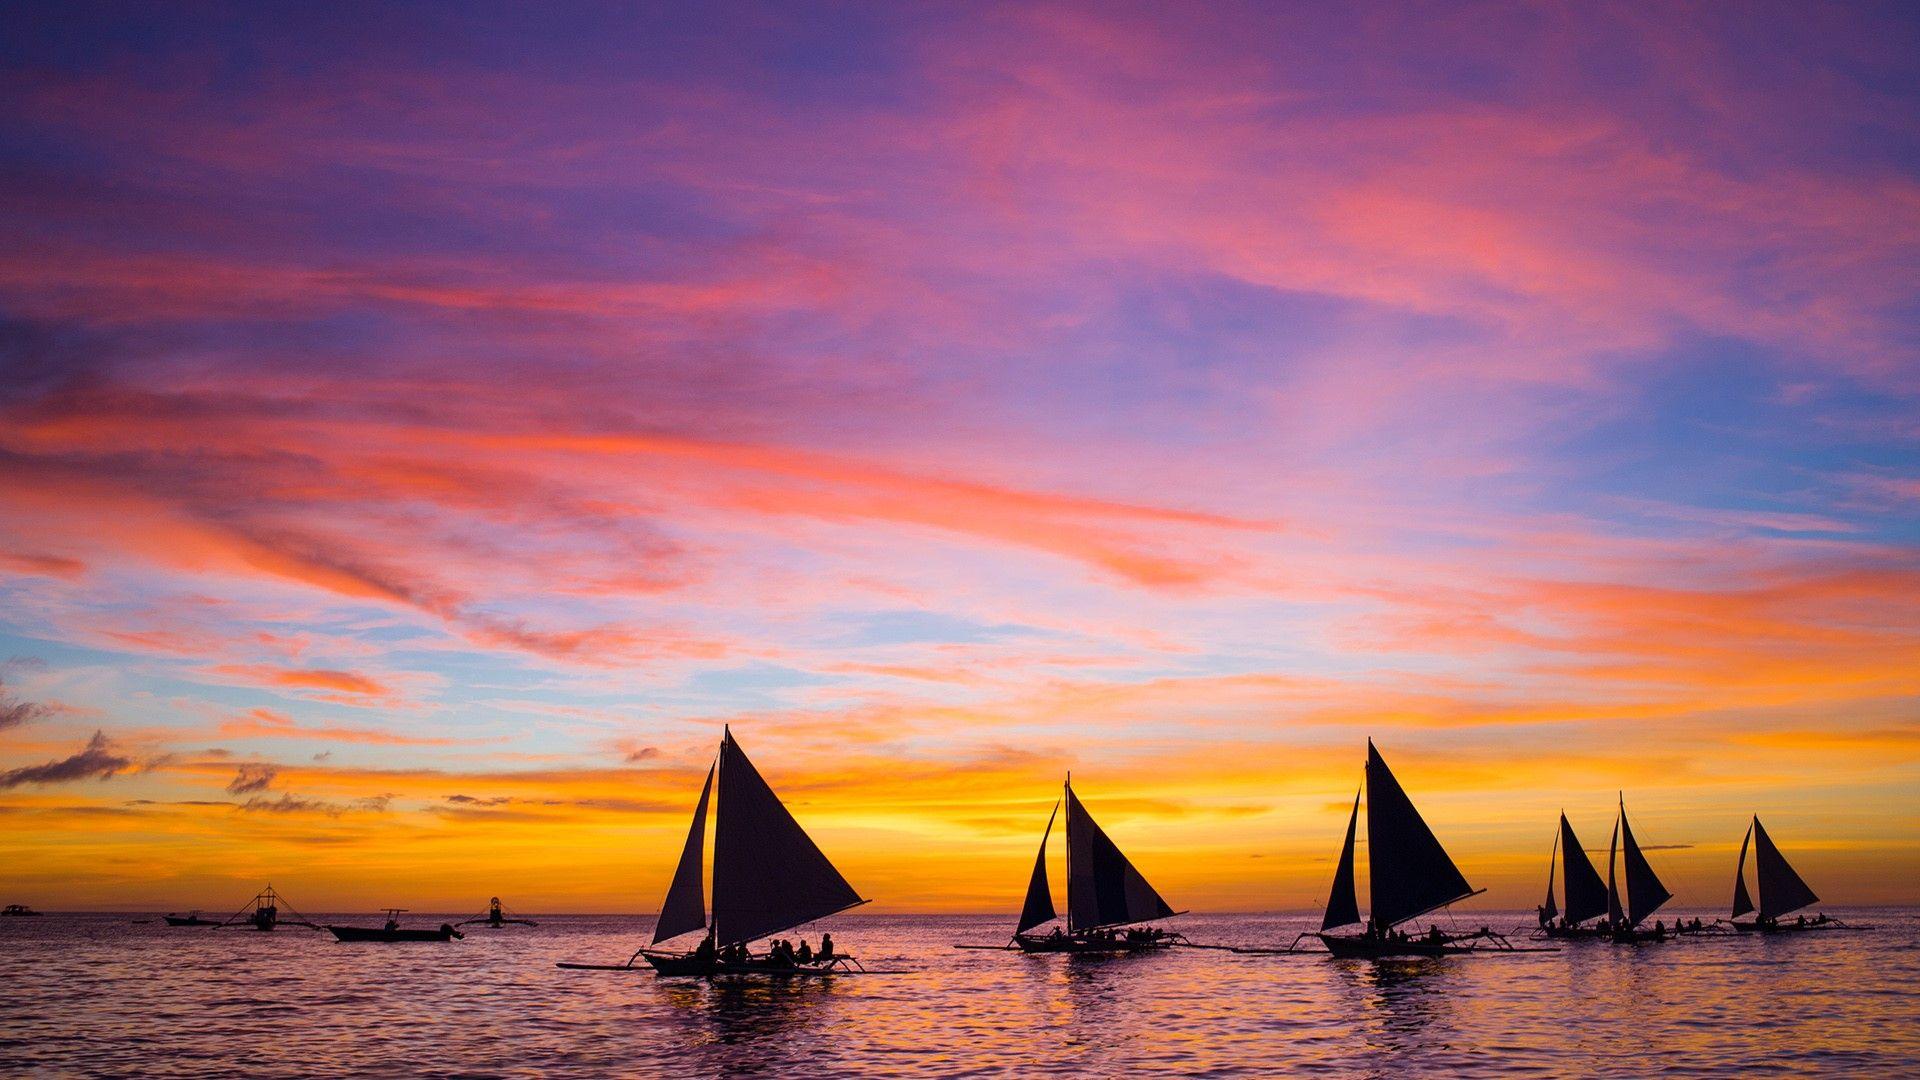 Sailing boats in the sea at sunset, Boracay, Philippines. Windows